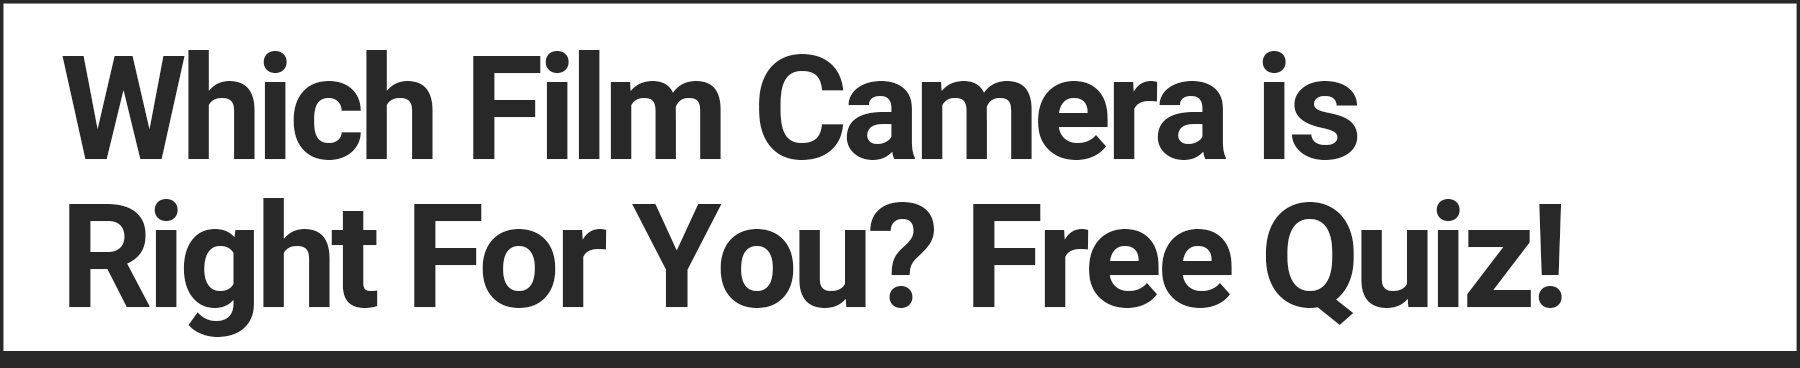 Which film camera is right for you? Free Quiz!